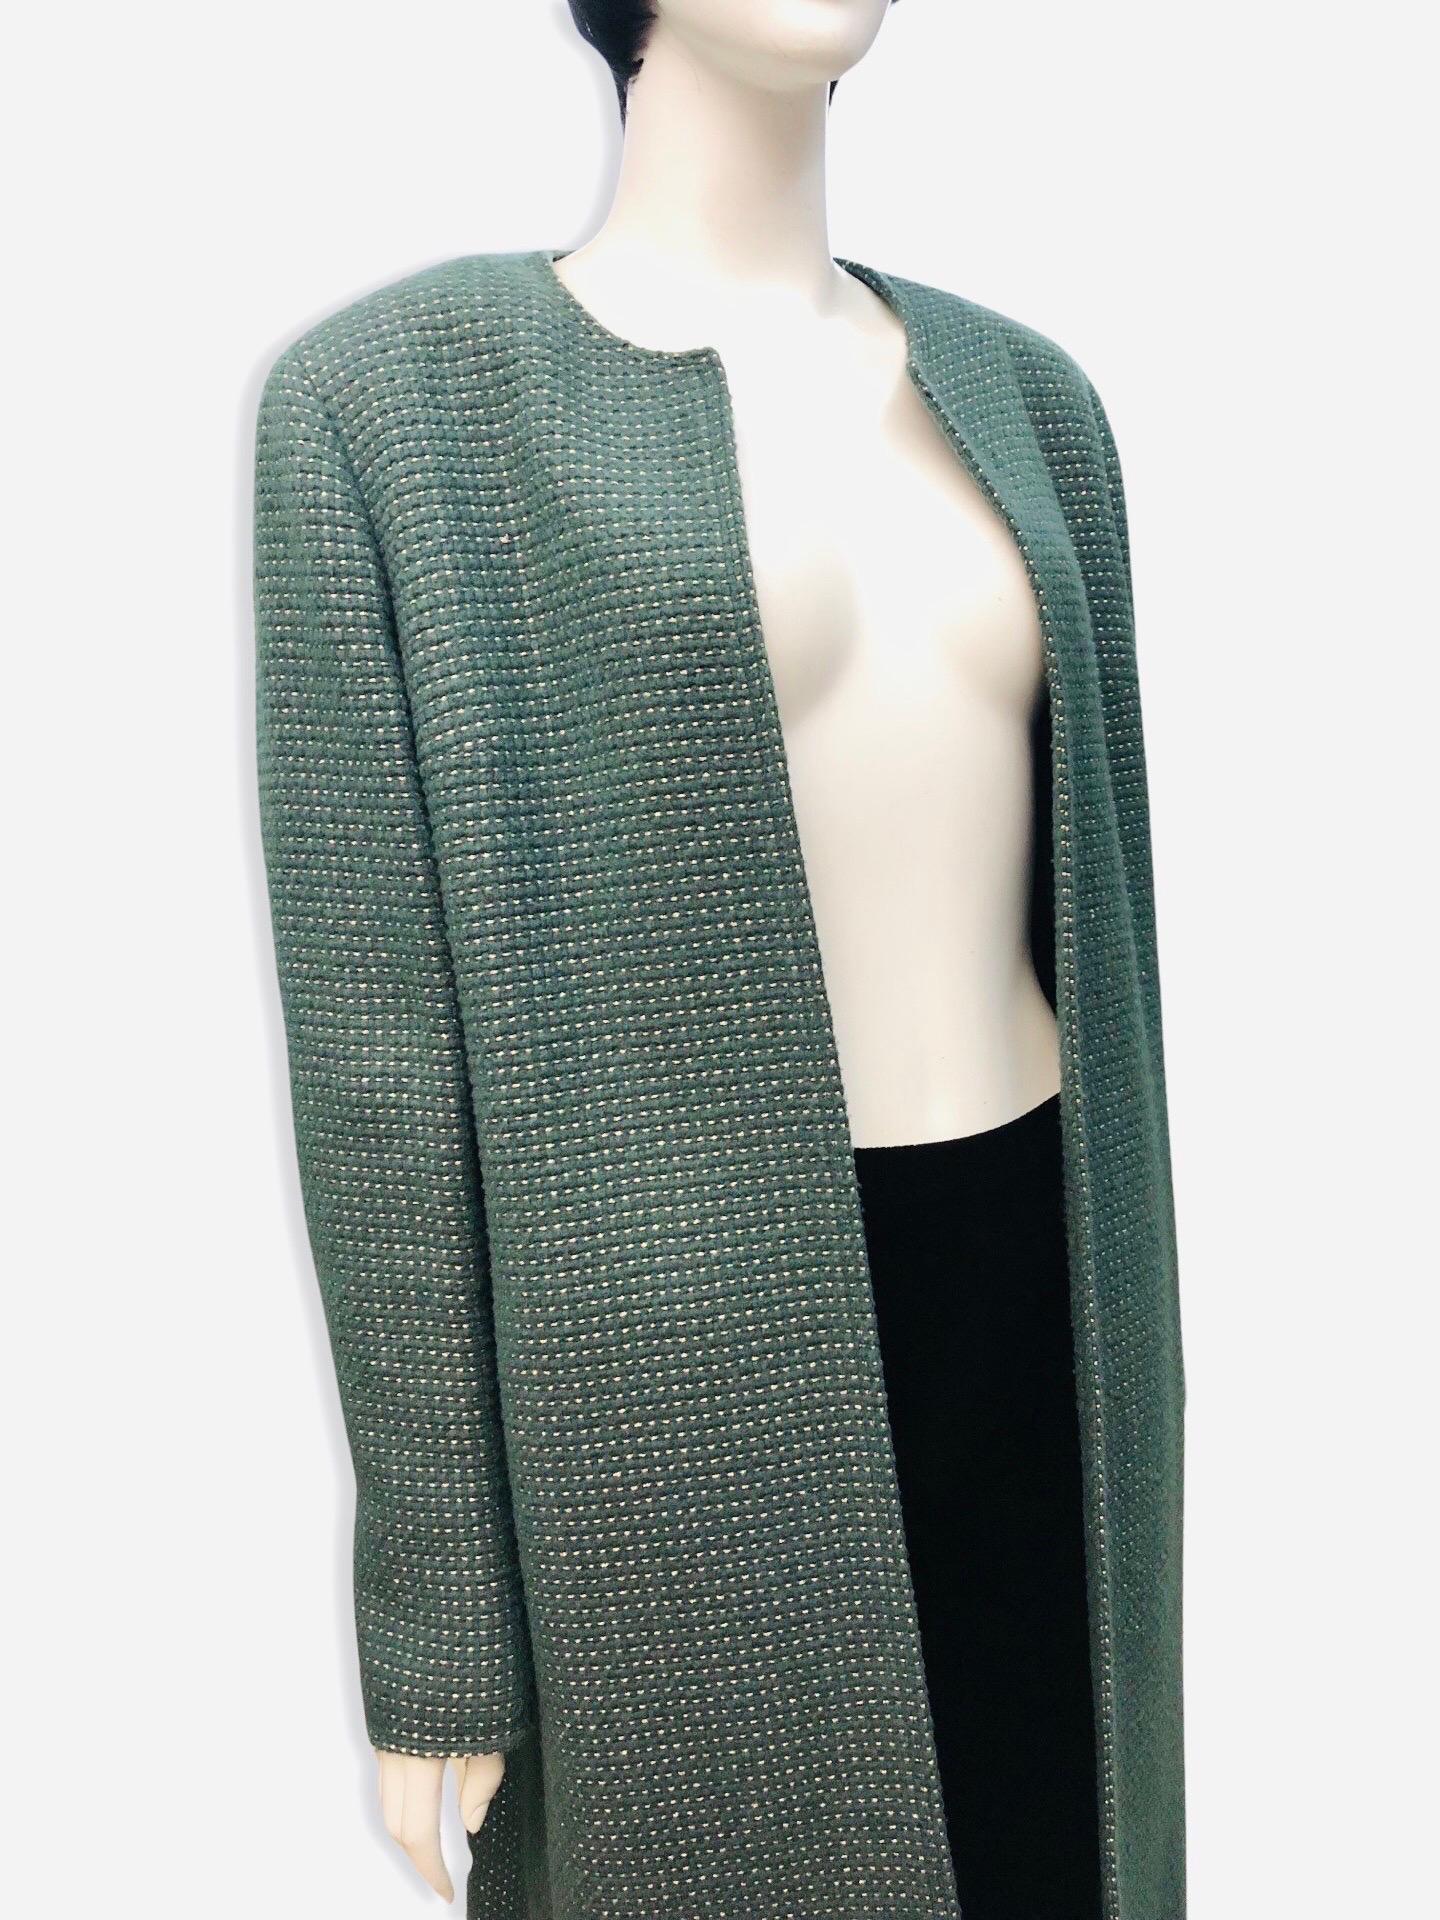 Chanel Green and Gold Tweed Wool Coat  In Good Condition For Sale In Sheung Wan, HK